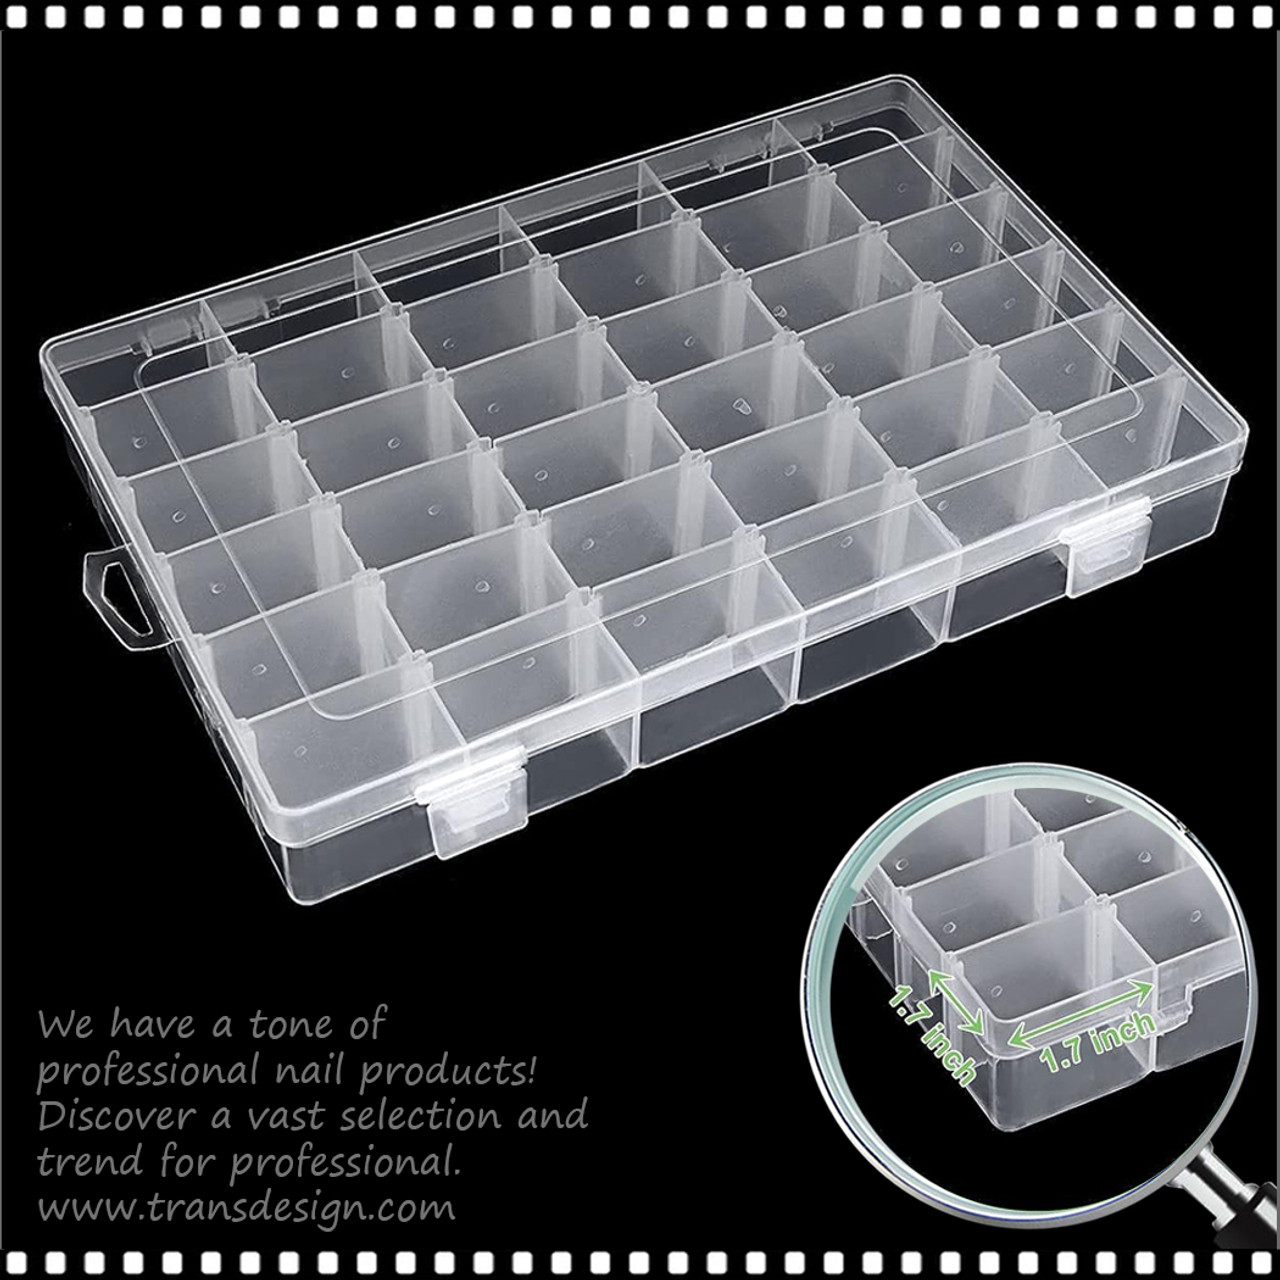 https://cdn11.bigcommerce.com/s-e4af5/images/stencil/1280x1280/products/45160/157202/1481_BOX_Organizer_36_Grids_Adjustable_Dividers_11_x_7_x_1__98016.1690804853.jpg?c=2?imbypass=on